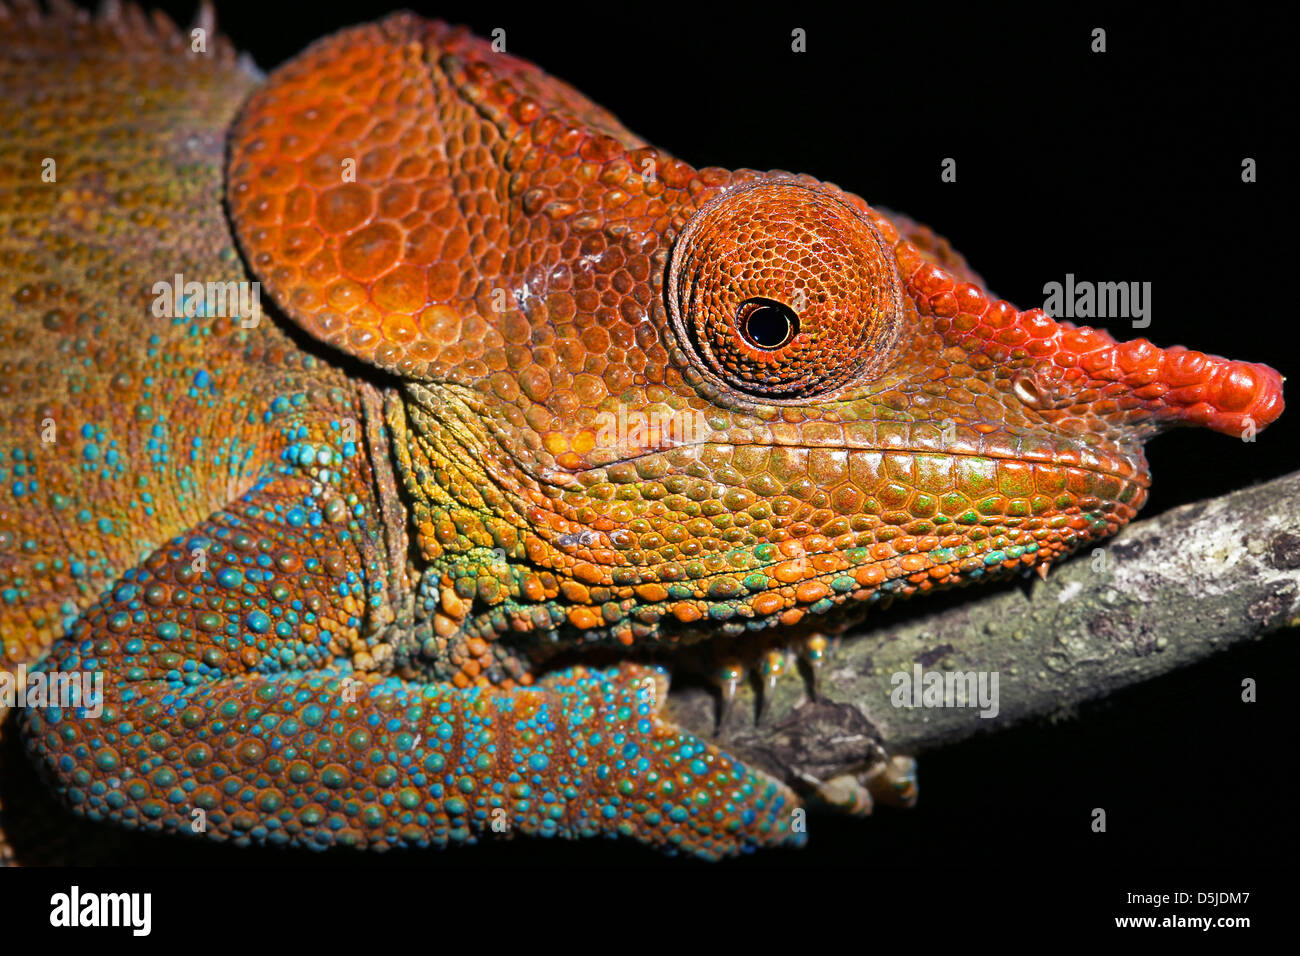 Male Cryptic or Blue-legged Chameleon (Calumma crypticum) rests on a branch in the wilds of Madagascar. Stock Photo